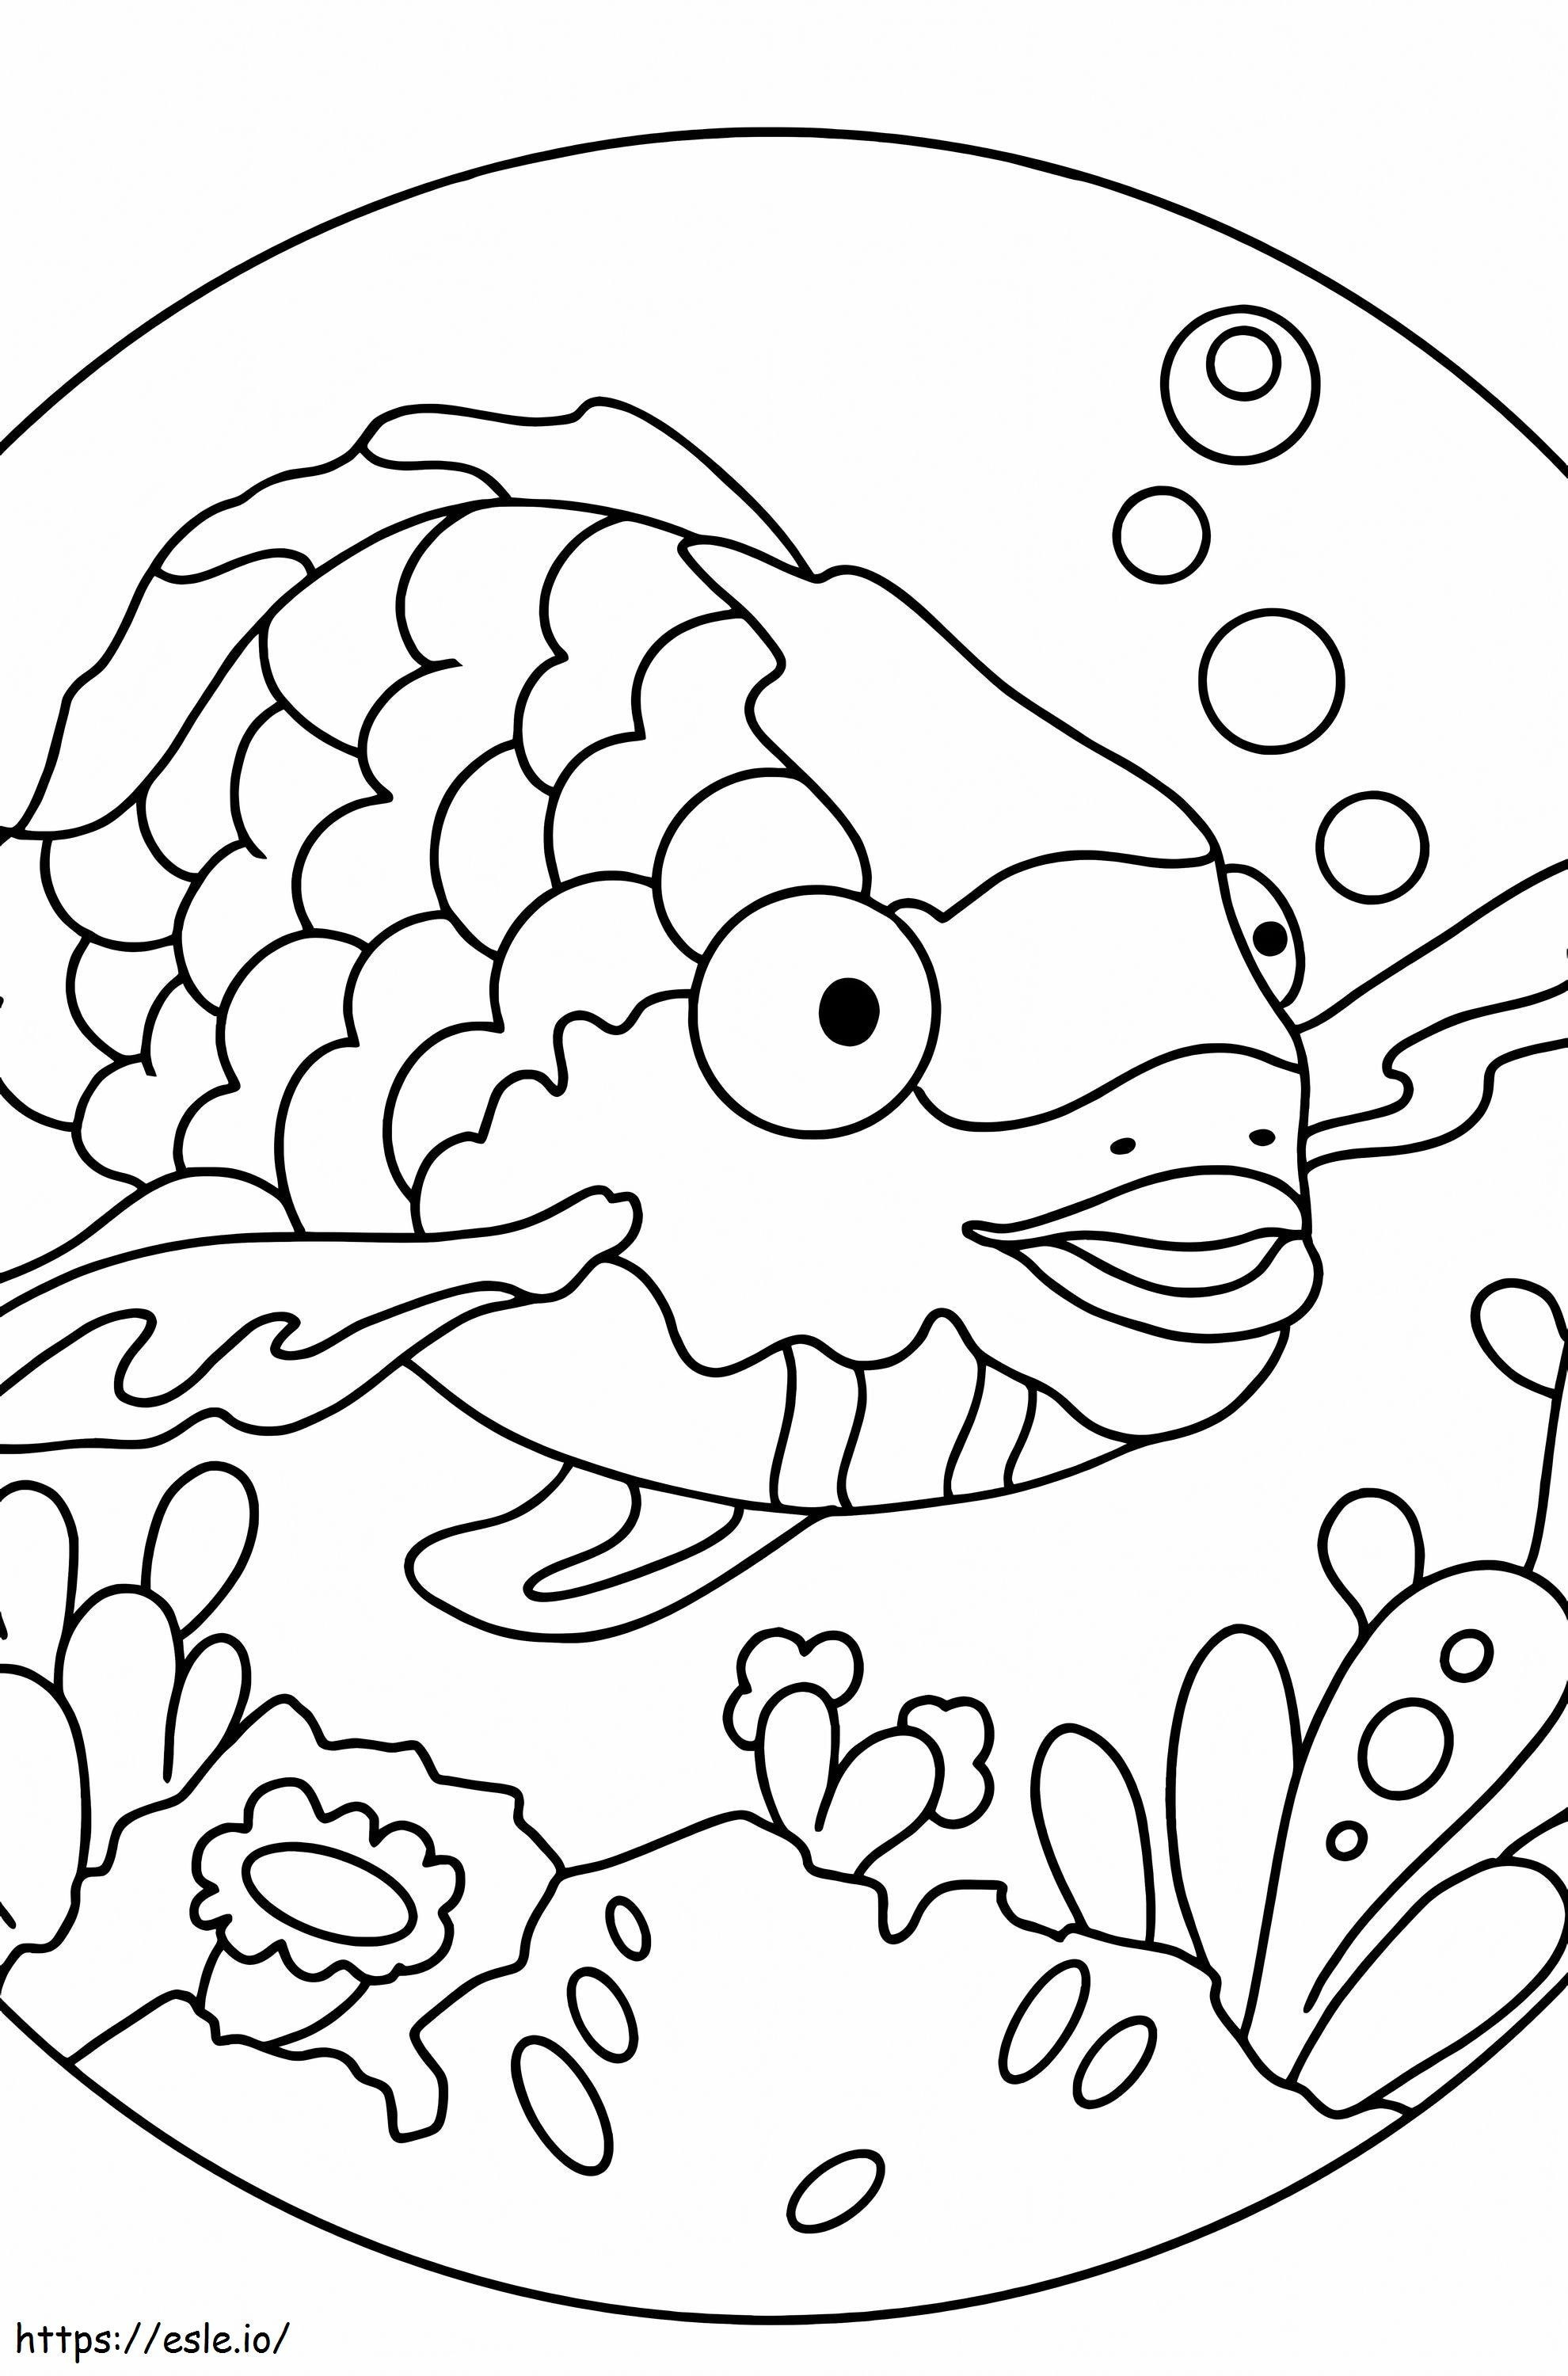 Normal Rainbow Fish coloring page